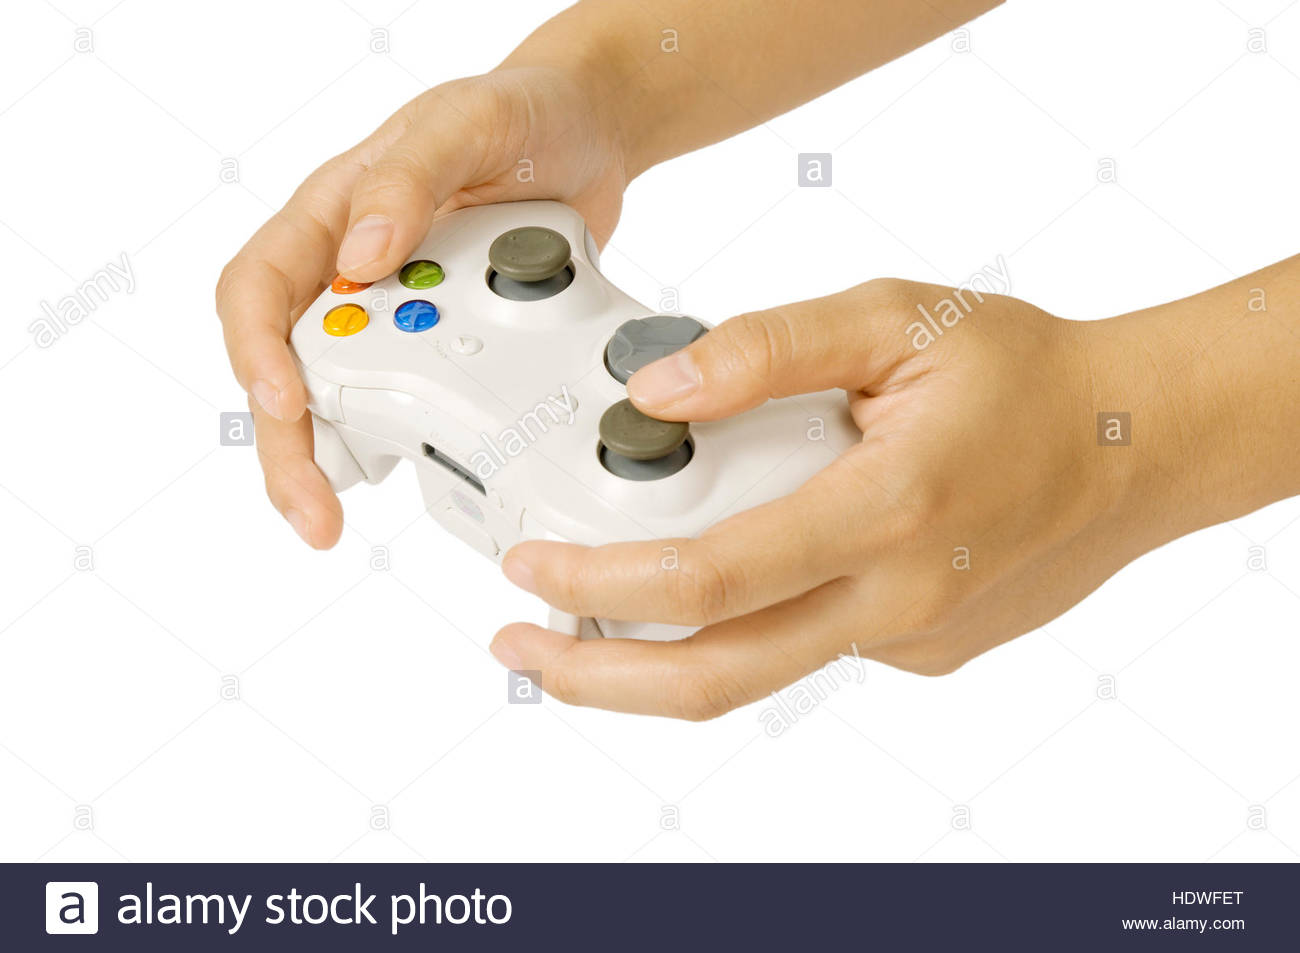 gamepad-hold-by-human-hand-isolated-over-white-background-HDWFET.jpg